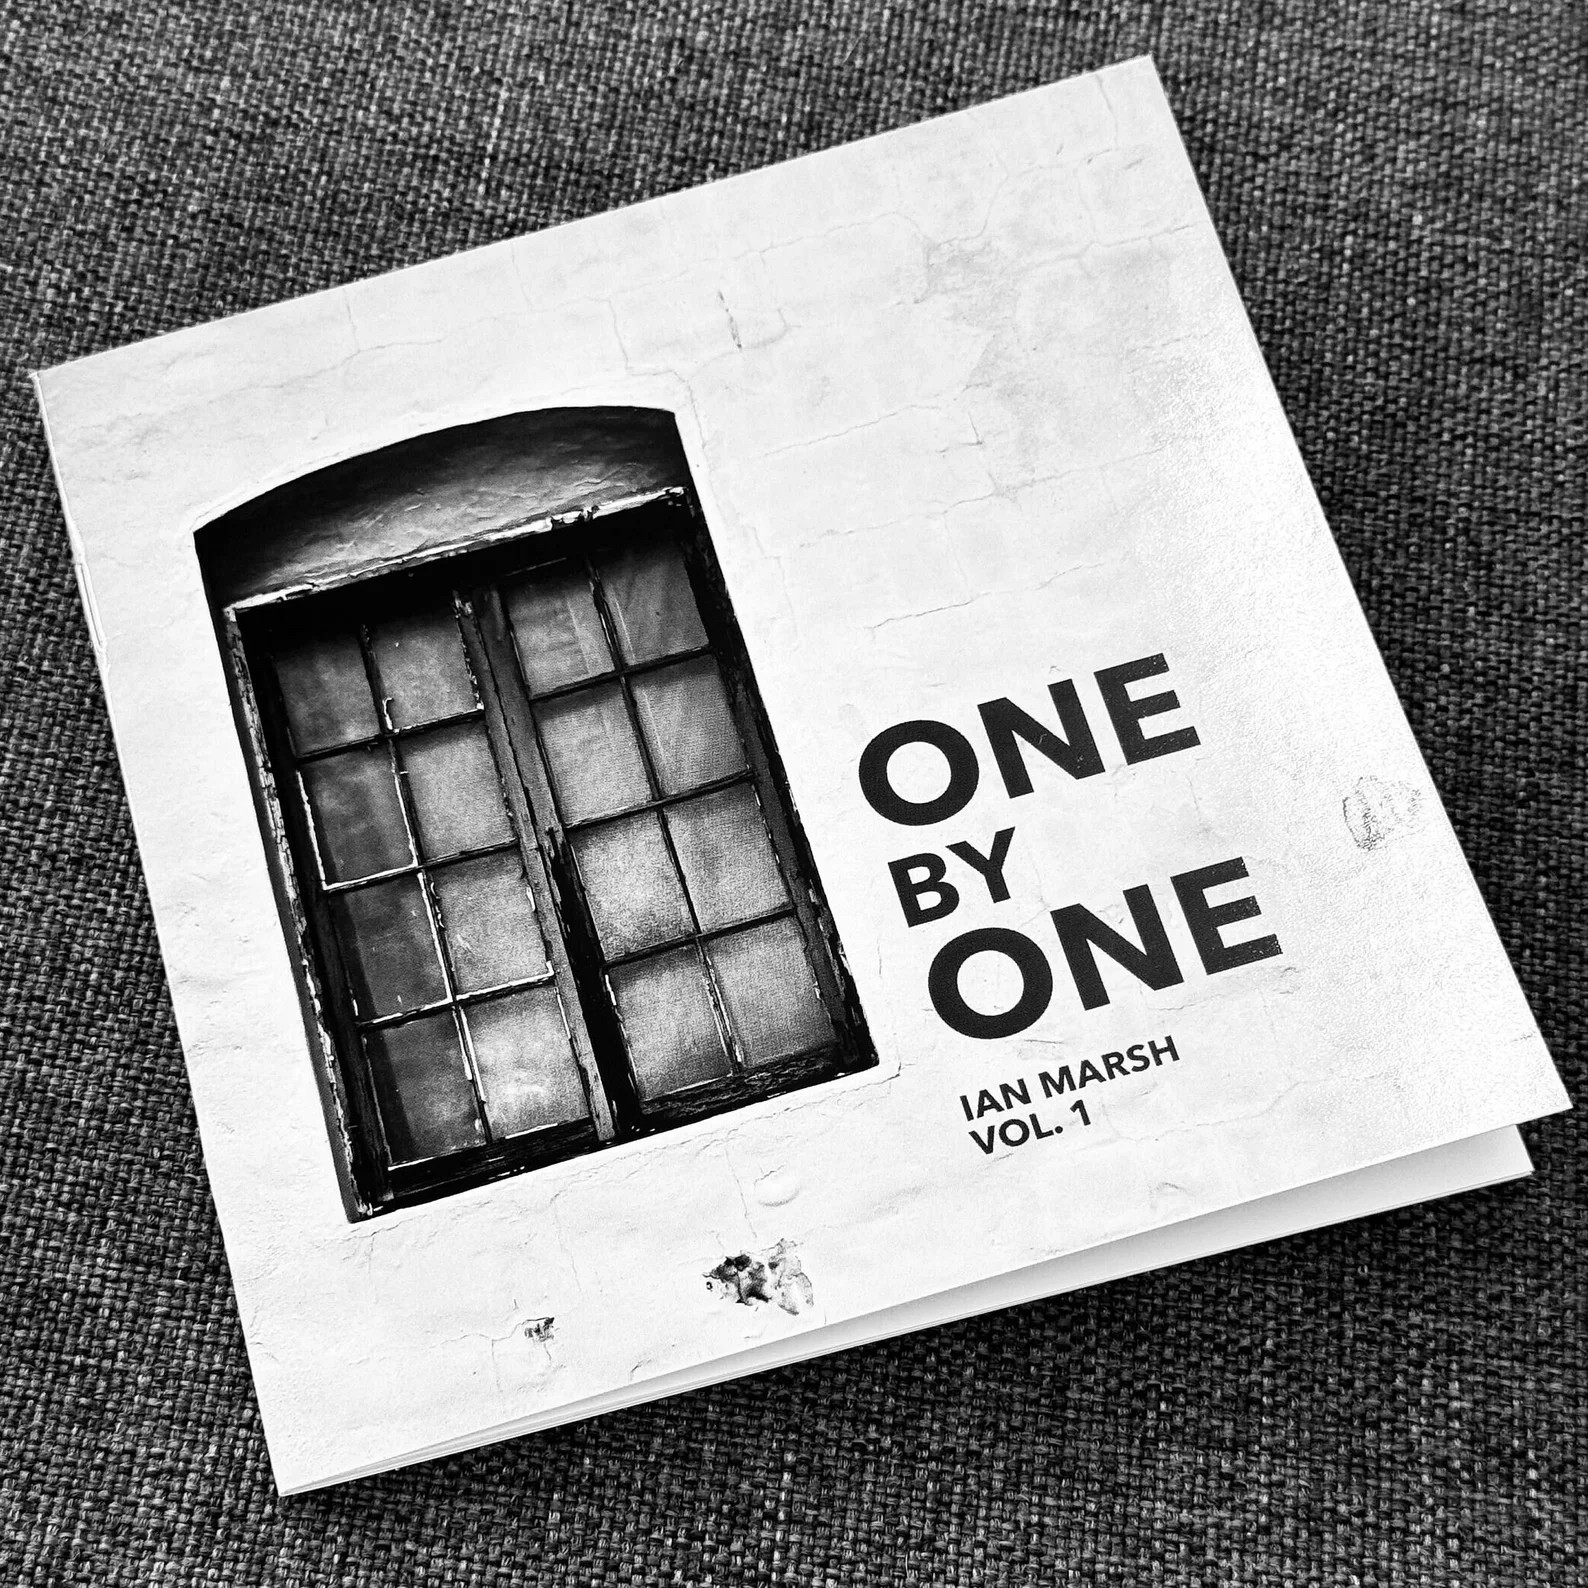 The image is a black and white photograph of a book with a textured cover. The book's cover features a realistic image of a window with multiple panes, some of which are slightly ajar, set into a white wall. Below the window, the book title "ONE BY ONE" is printed in large, bold, uppercase letters, followed by the name "IAN MARSH" in smaller, uppercase letters, and the text "VOL. 1" below the name. The book is lying on a gray fabric surface with a noticeable weave pattern, and there are small, white paint specks visible on the cover, particularly near the bottom edge, suggesting the book may be used or placed in a creative setting.